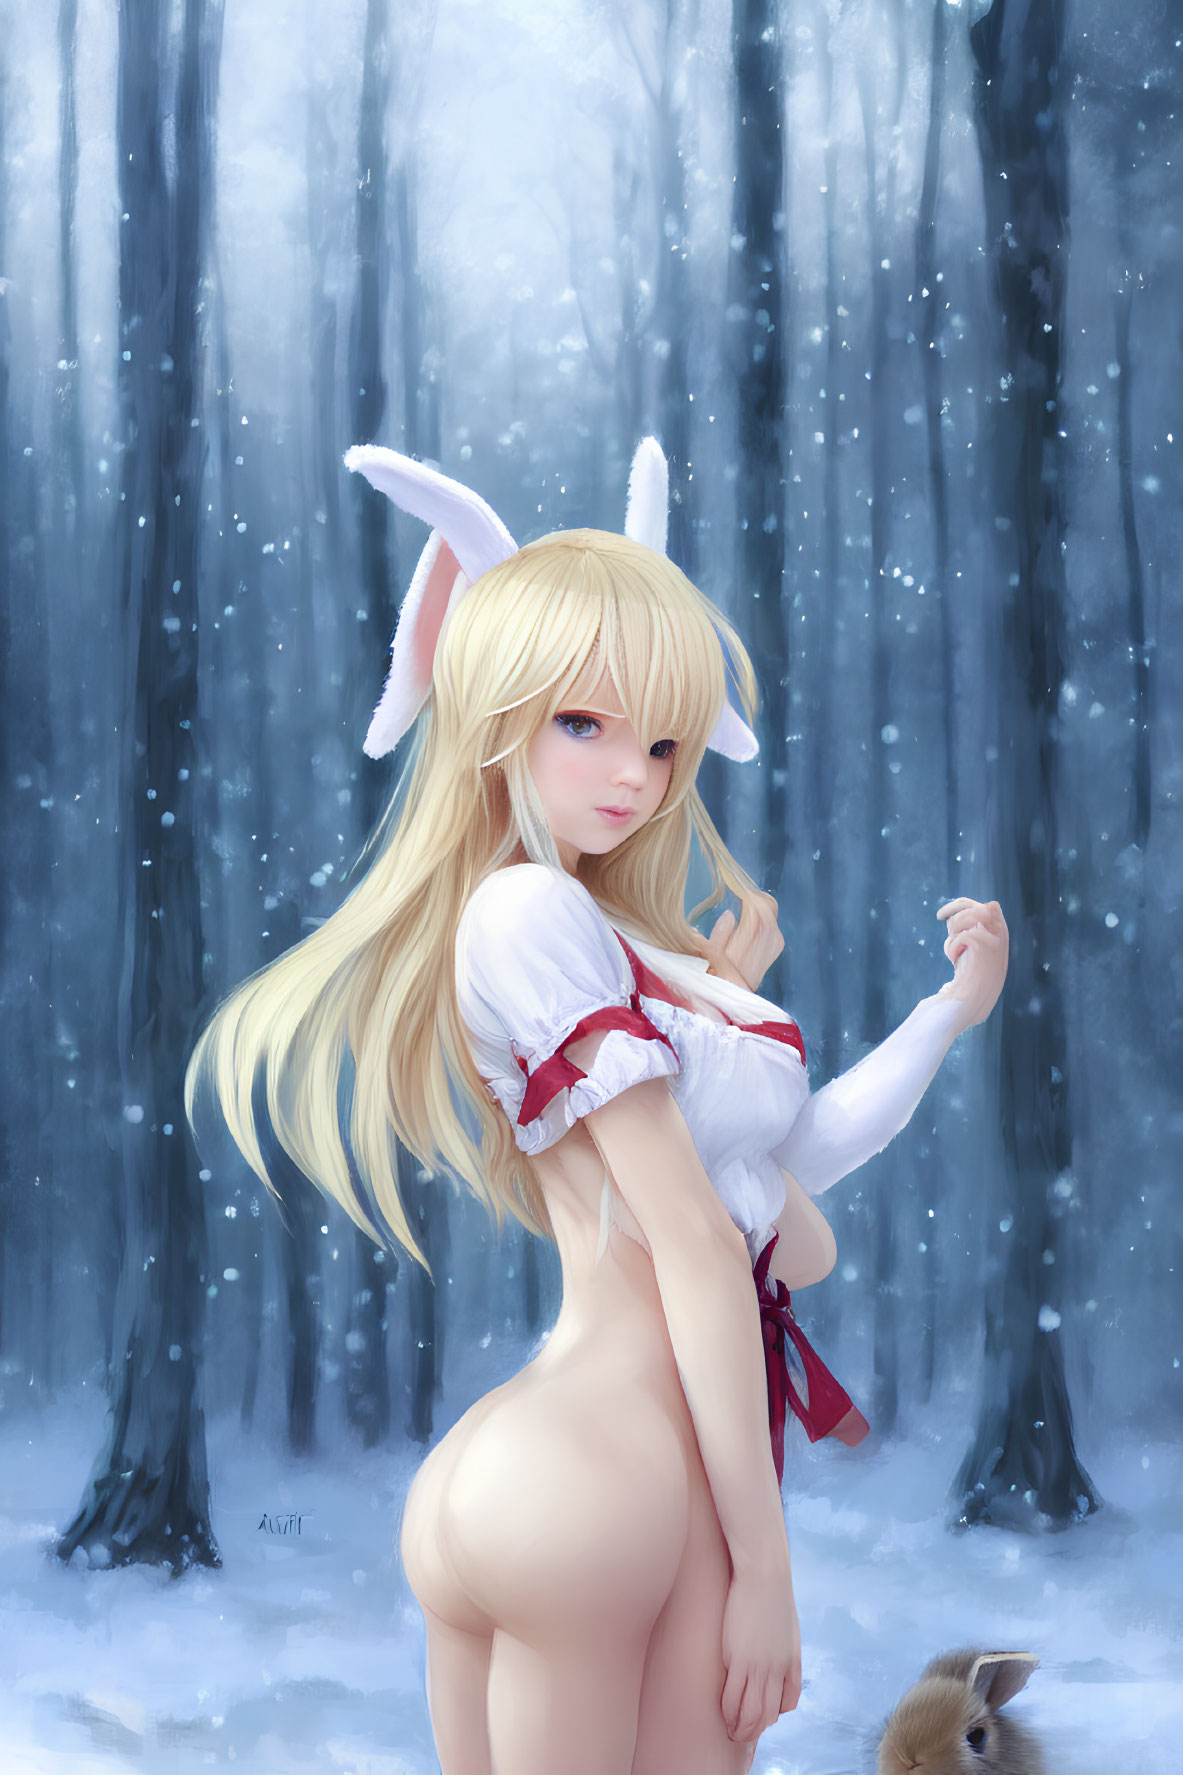 Blonde Anime Character with Rabbit Ears in Snowy Forest